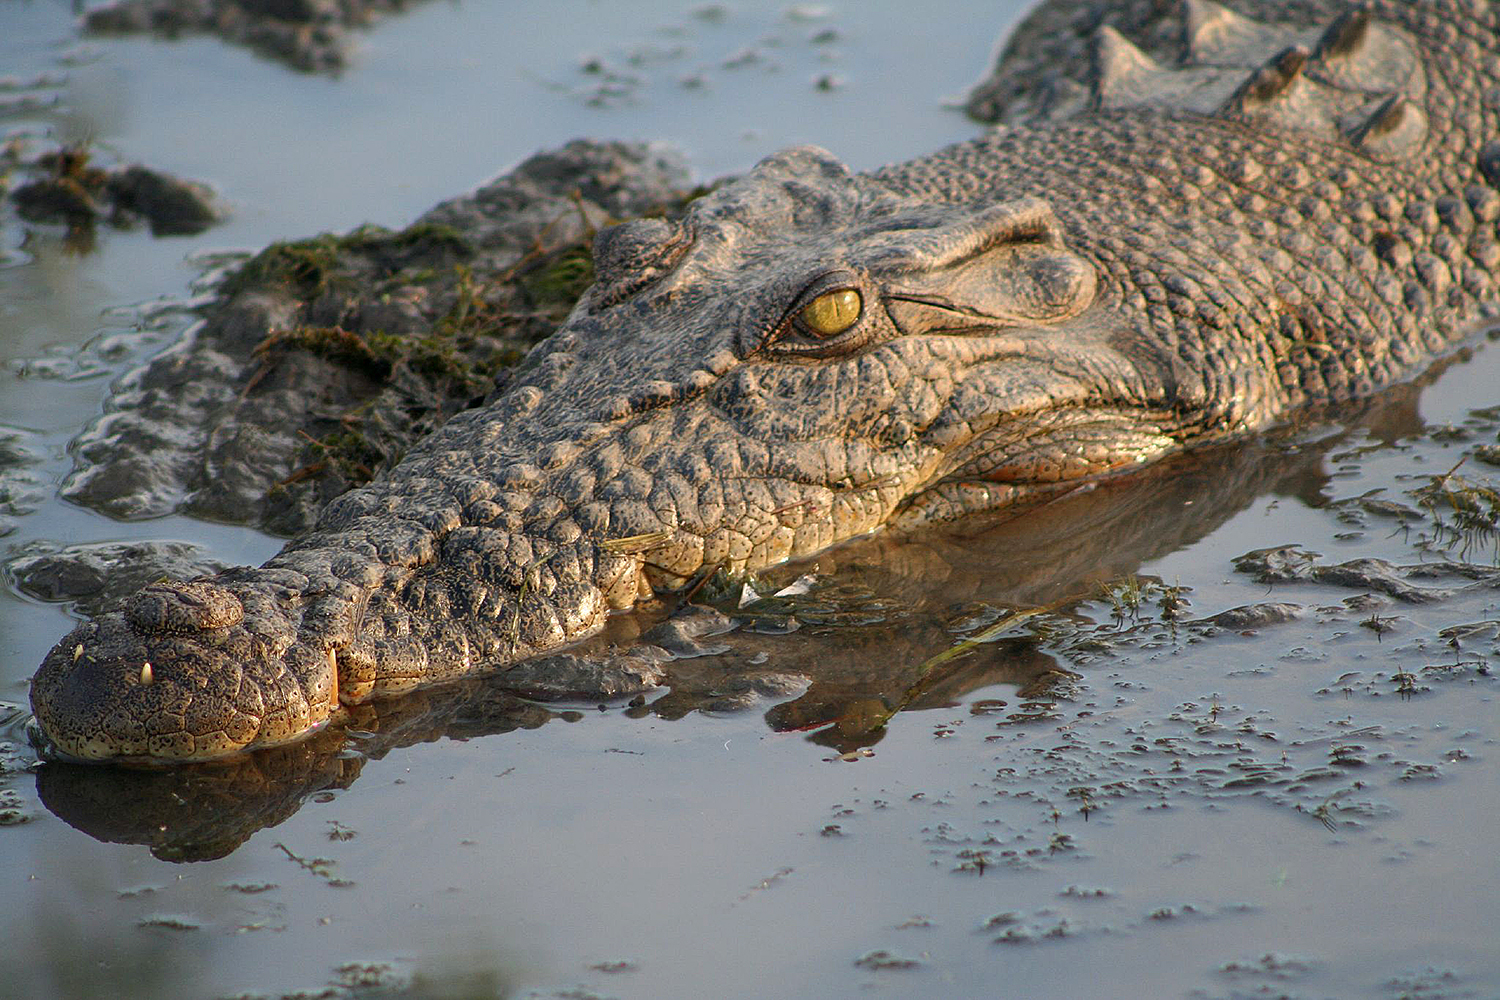 Stare down a croc in Kakadu National Park, stomping ground of the actors in Crocodile Dundee. Image by Stephen Michael Barnett / CC BY 2.0 